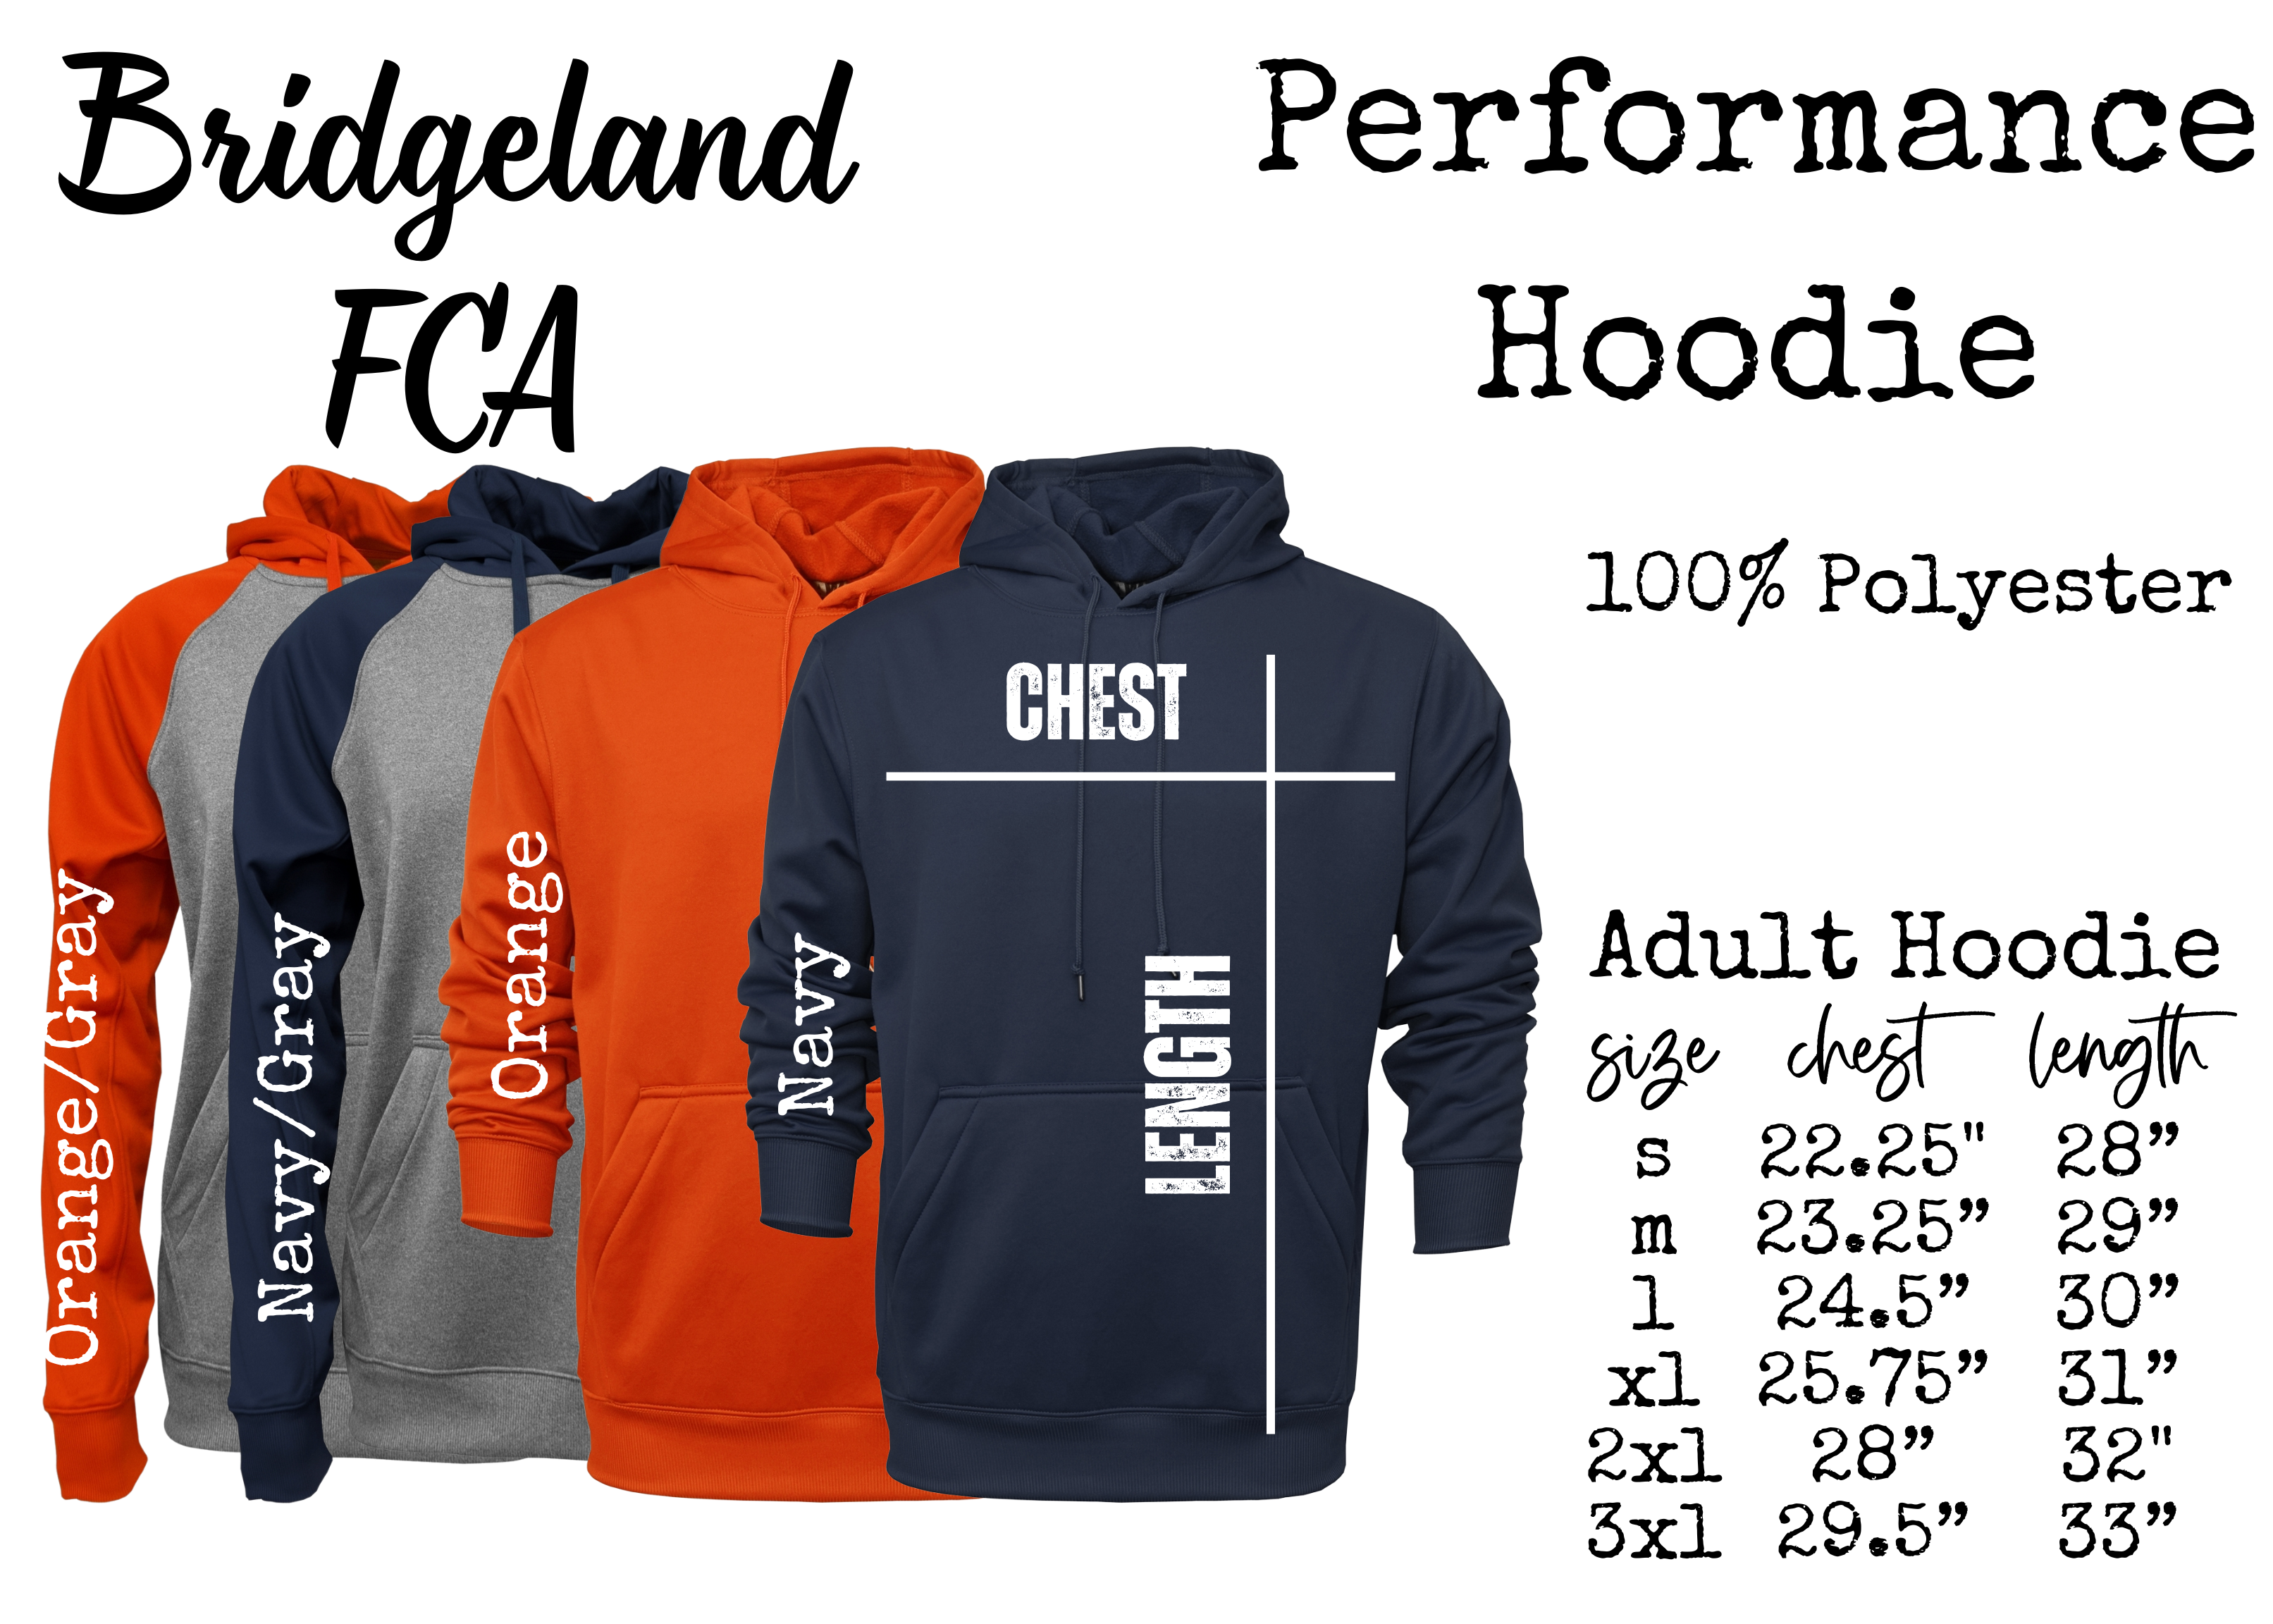 FCA Outlined Performance Hooded Sweatshirt